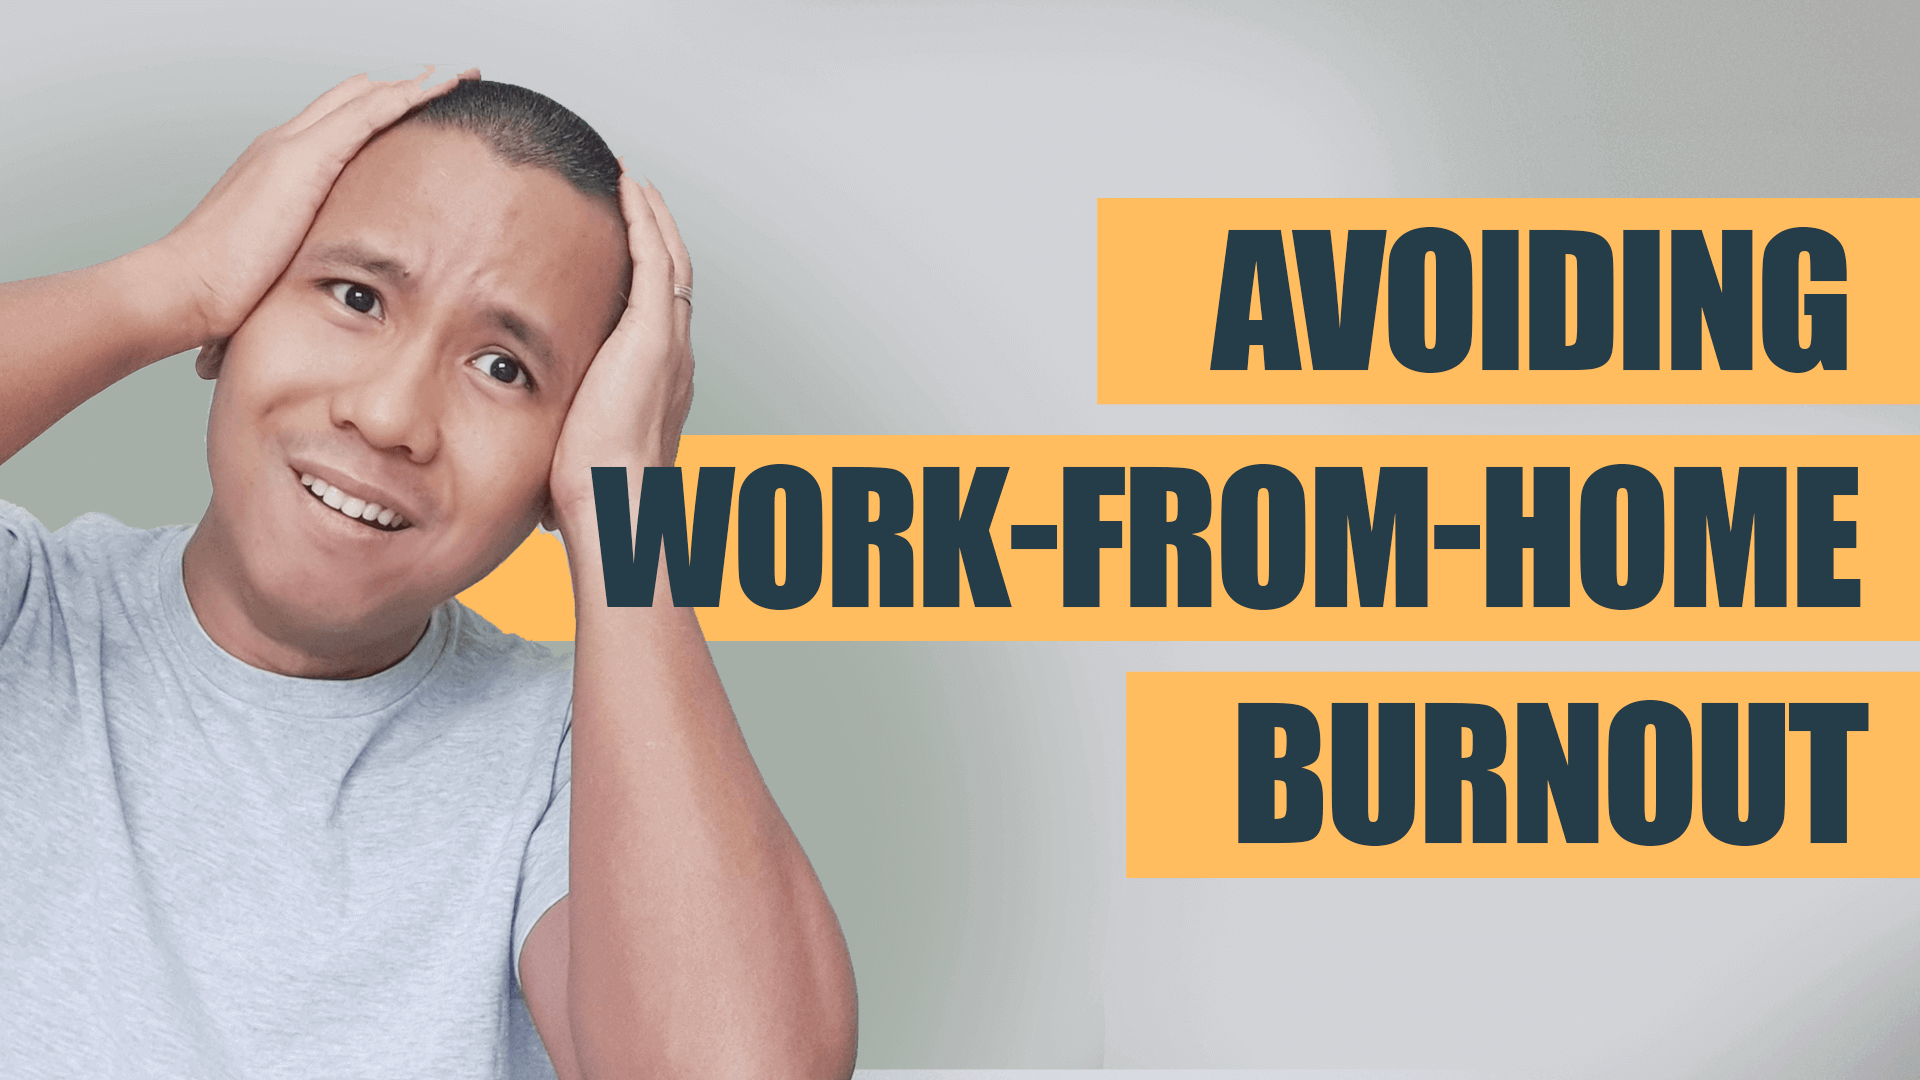 How to Avoid Work From Home Burnout